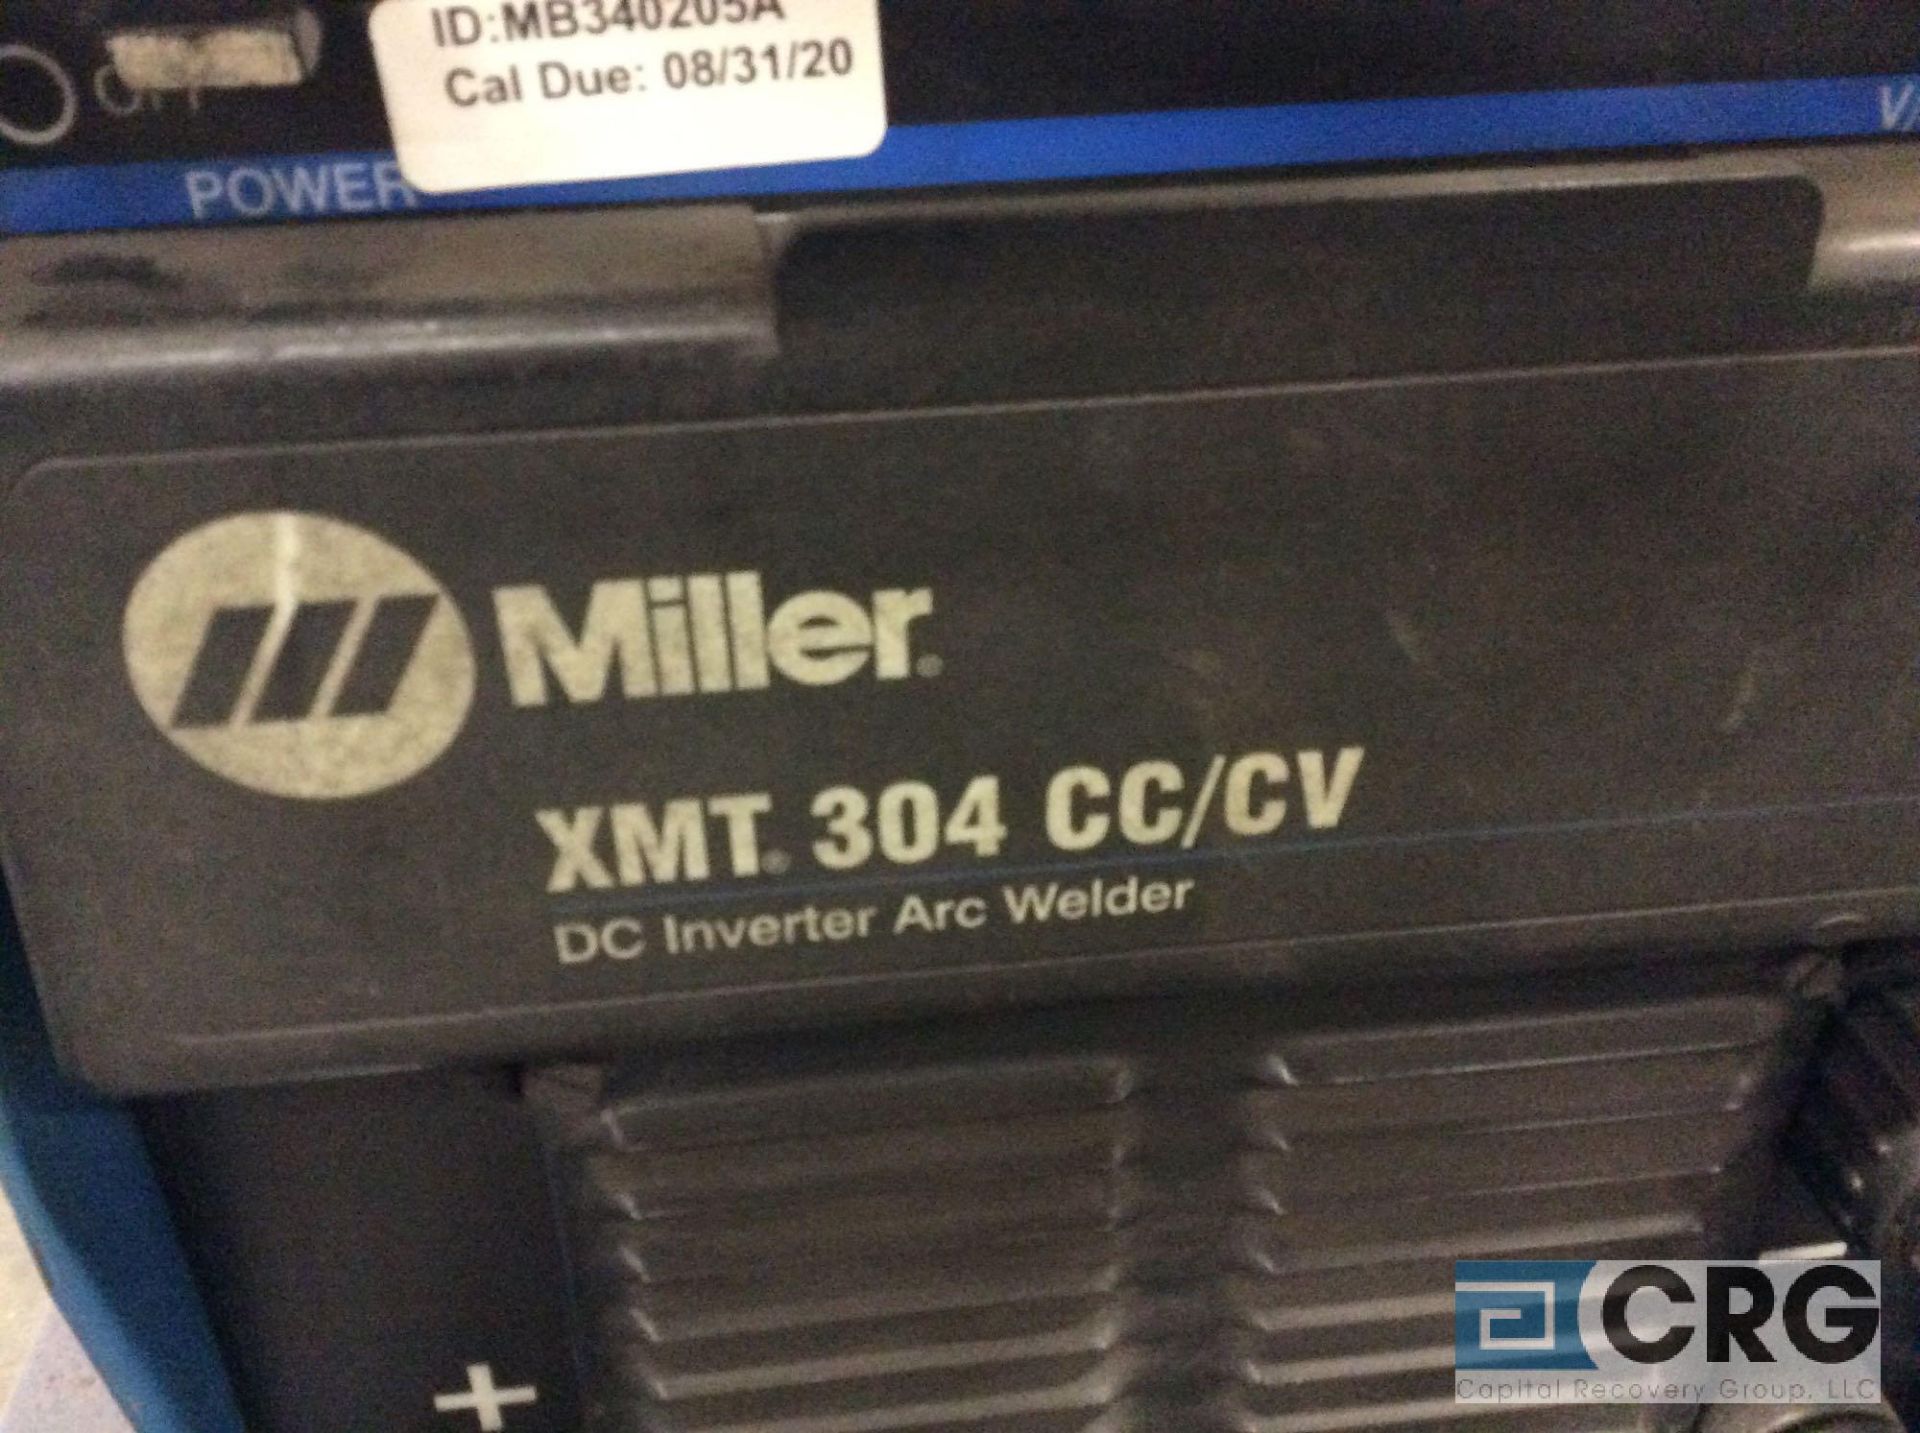 Miller XMT 304 CC/CV DC inverter arc welder, 96 max OCV, 3 phase, With 24V wire feed - Image 2 of 4